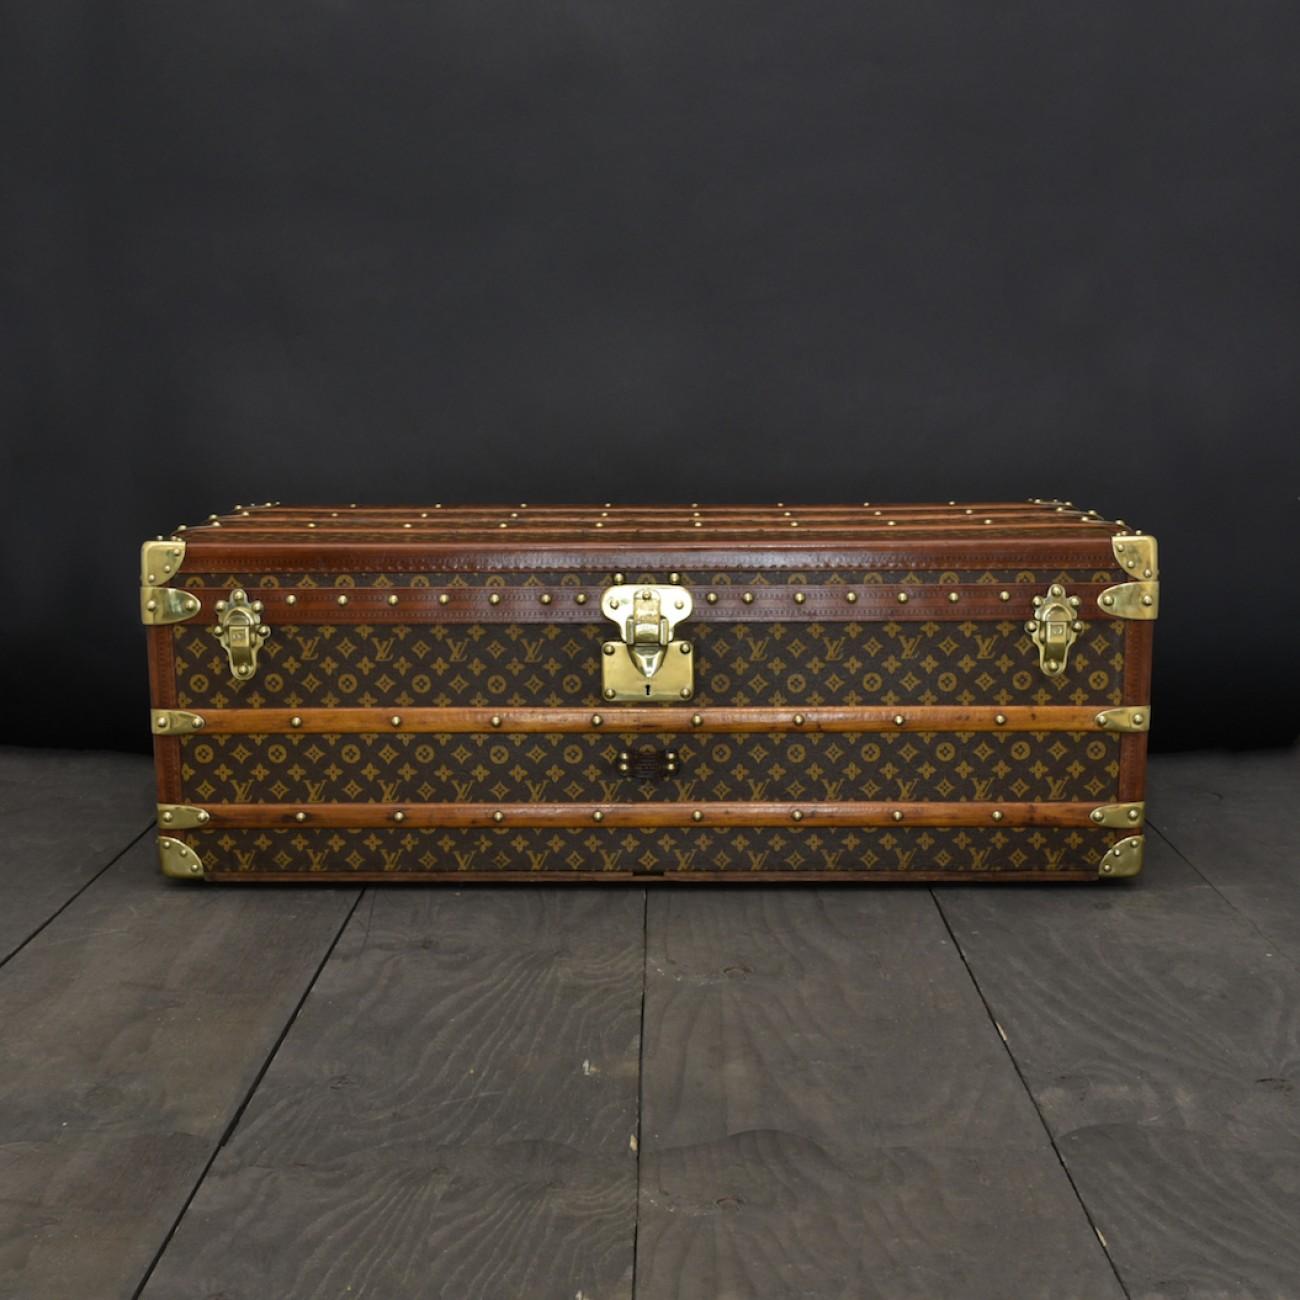 A wonderful brass bound Louis Vuitton monogram cabin trunk that is taller than usual and would be the perfect coffee table. The trunk is in excellent condition and comes complete with its original interior and polished brass fittings. The newly made